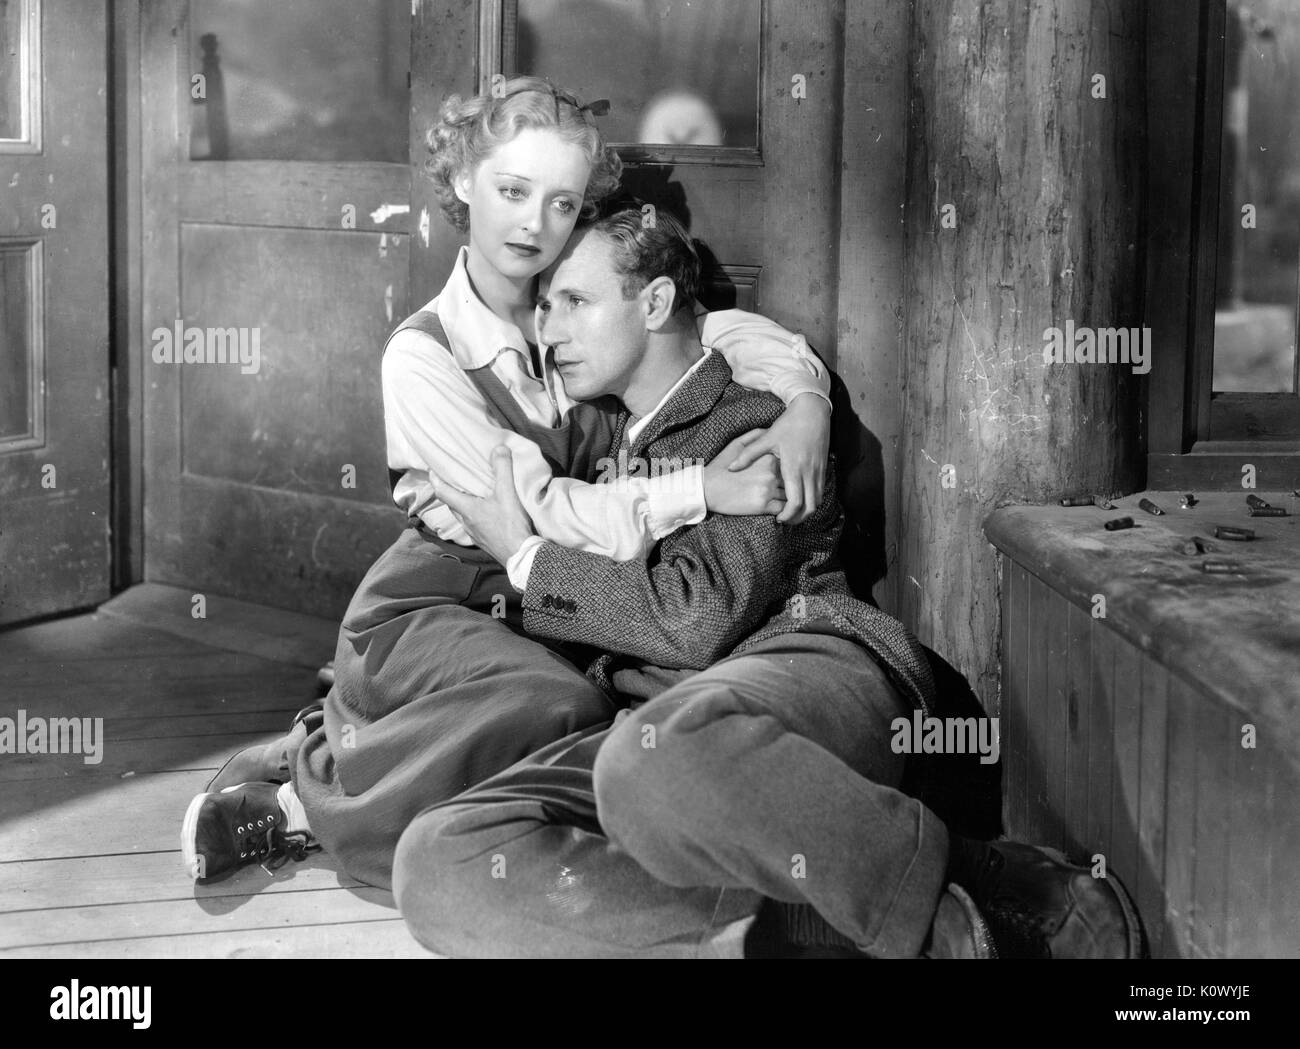 Bette Davis holding a man, lying on the floor of a room, in a movie still, 1949. Photo credit Smith Collection/Gado/Getty Images. Stock Photo